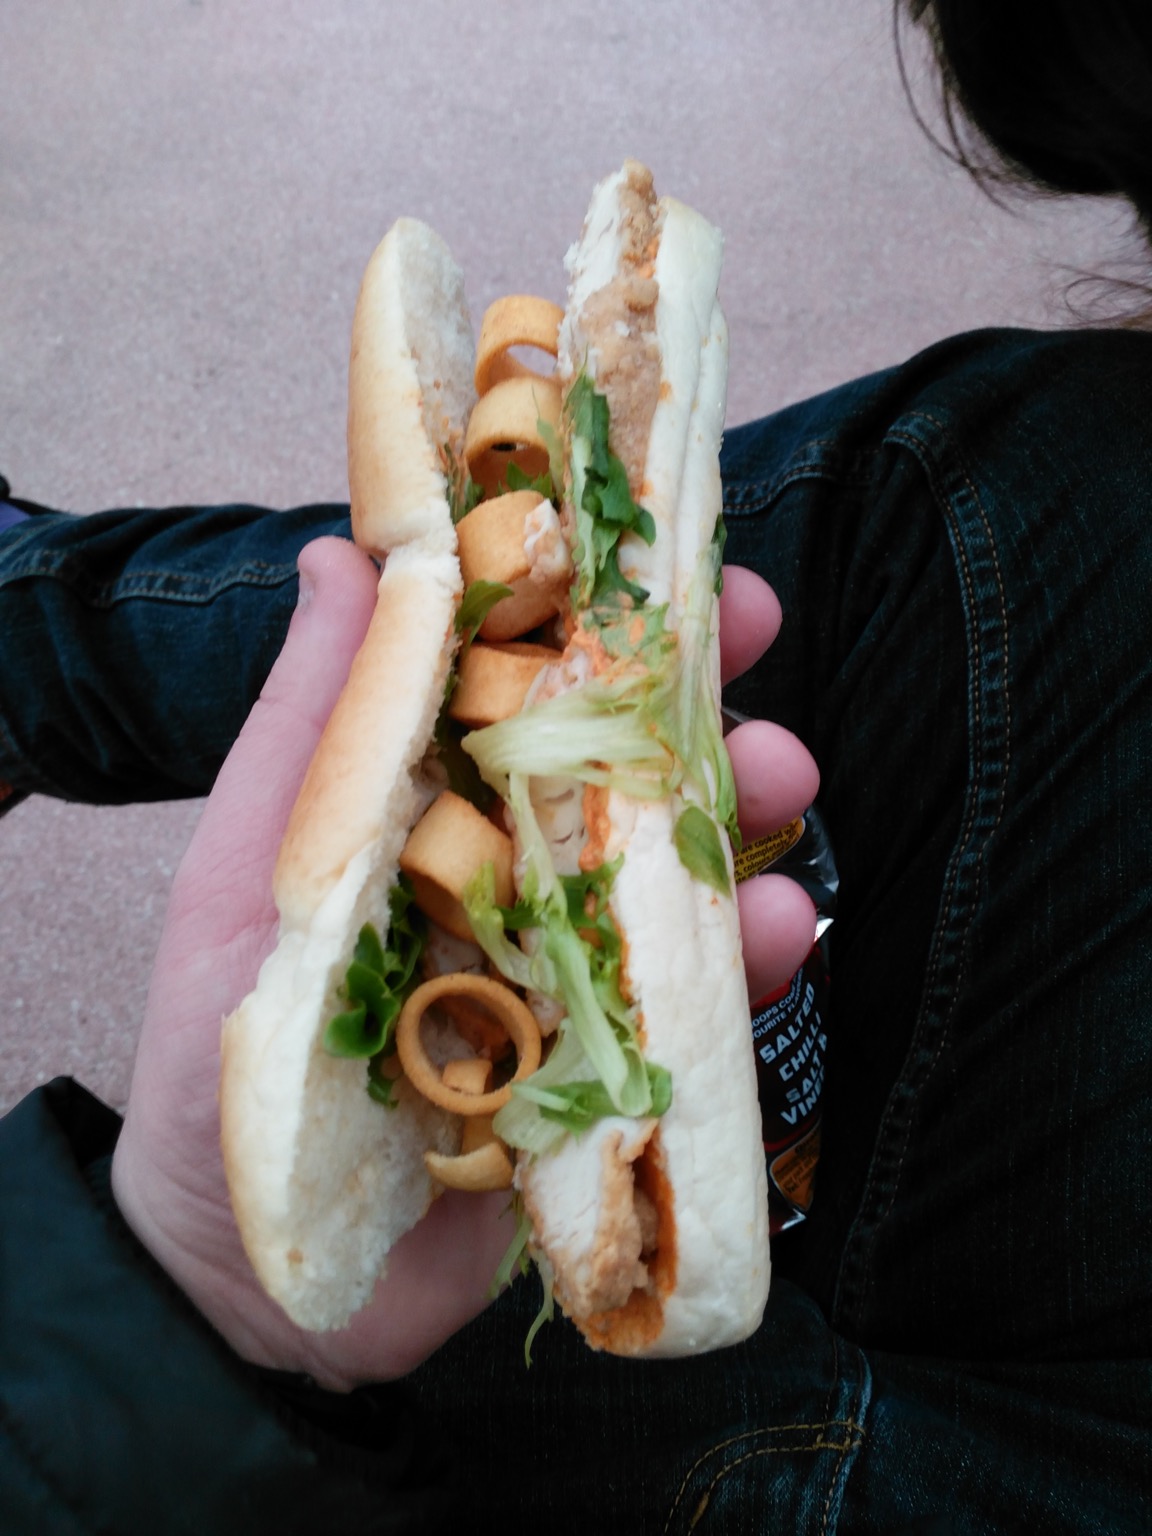 Baguette containing Hula Hoops, meat and salad